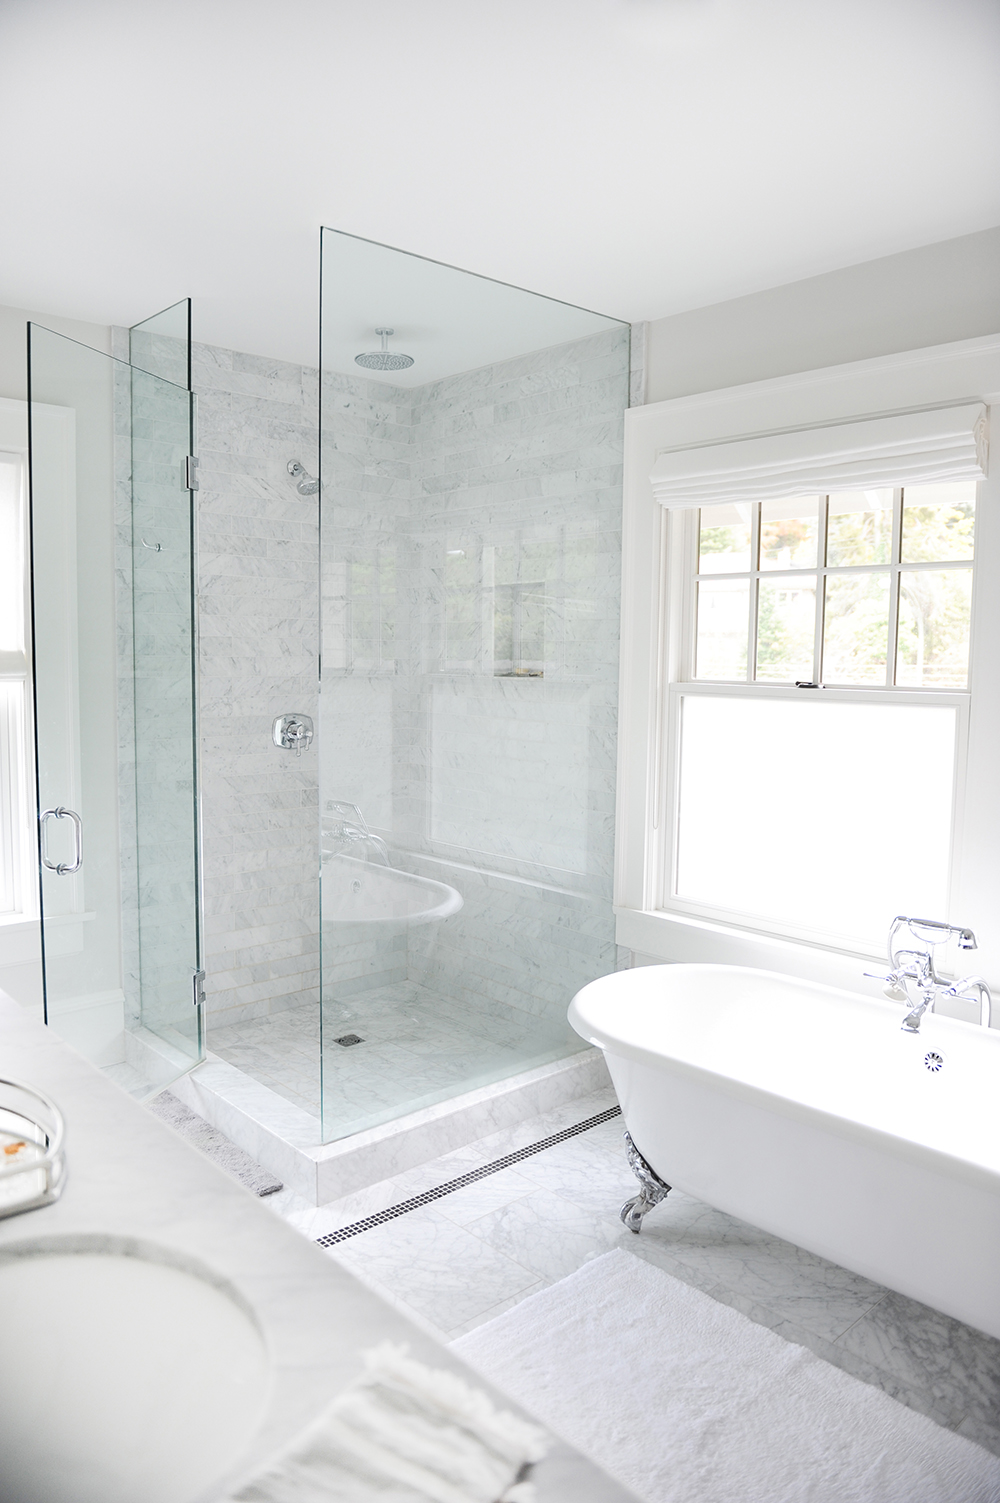 A spacious ensuite with a glass-enclosed shower and clawfoot tub.